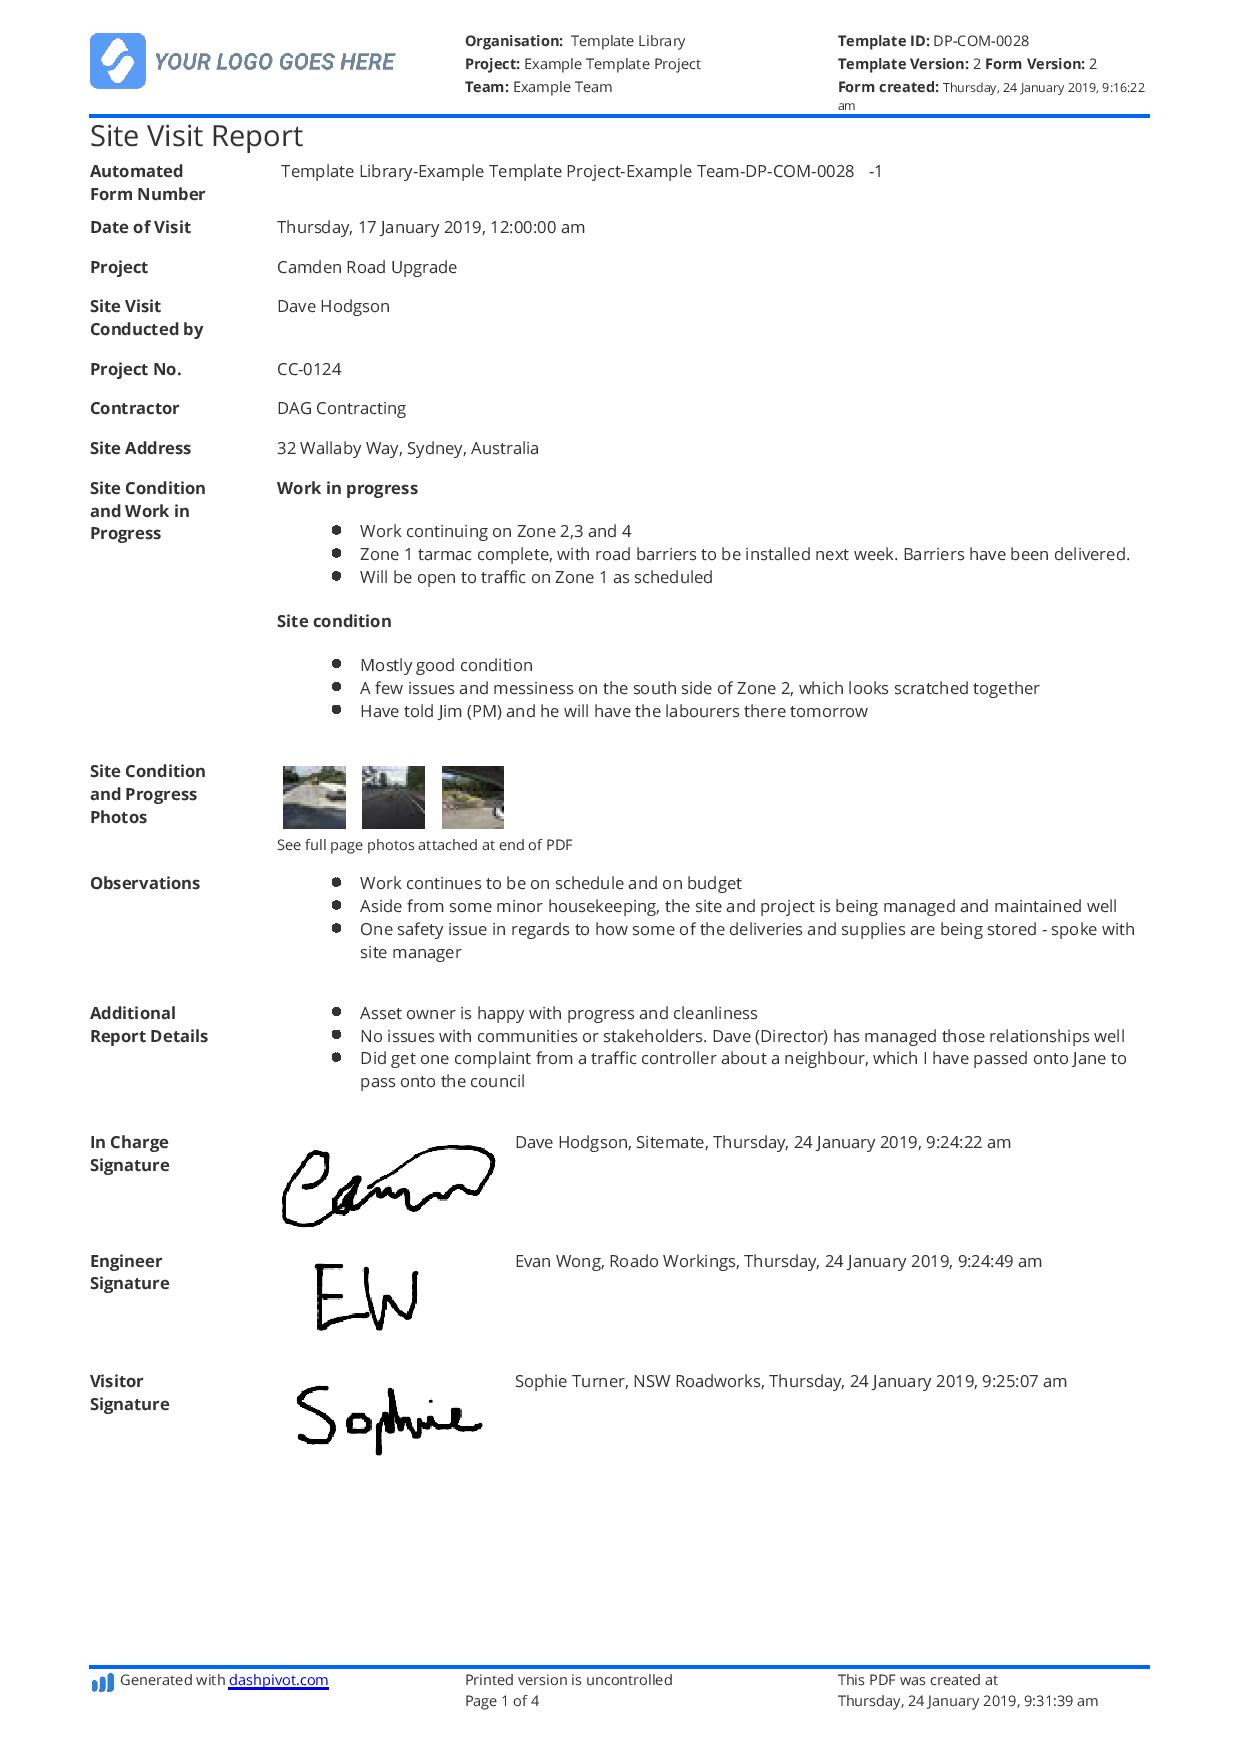 Construction Site Visit Report template and sample [Free to use] Inside Site Visit Report Template